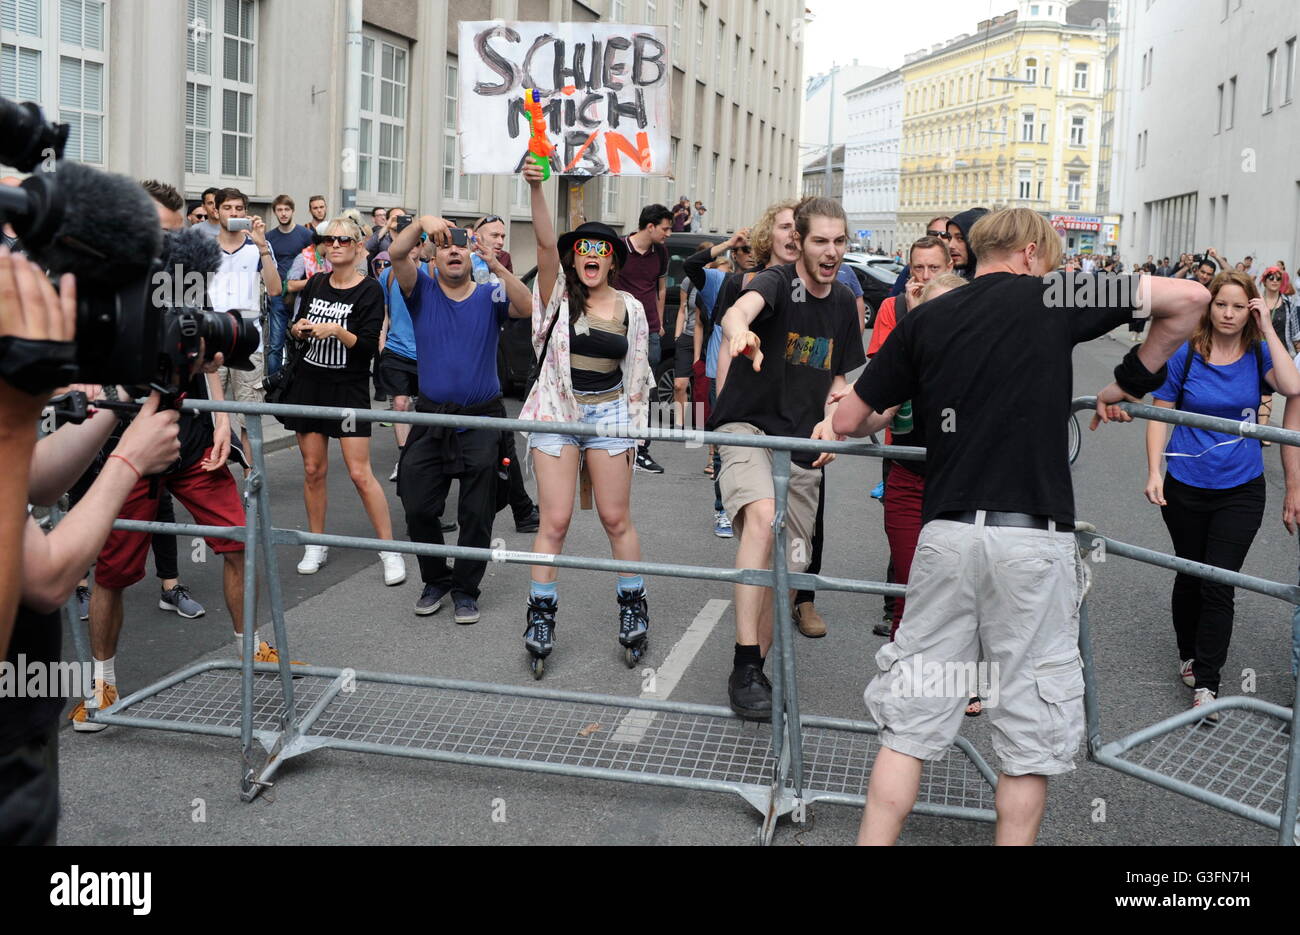 Vienna, Austria. 11th June, 2016. The demonstration of the rights identitary was a massive police presence to accompany the demonstration in front of the left counter-demonstrators to protect. Leftist counter-demonstrators block the demonstration of identitary. Credit:  Franz Perc / Alamy Live News Stock Photo